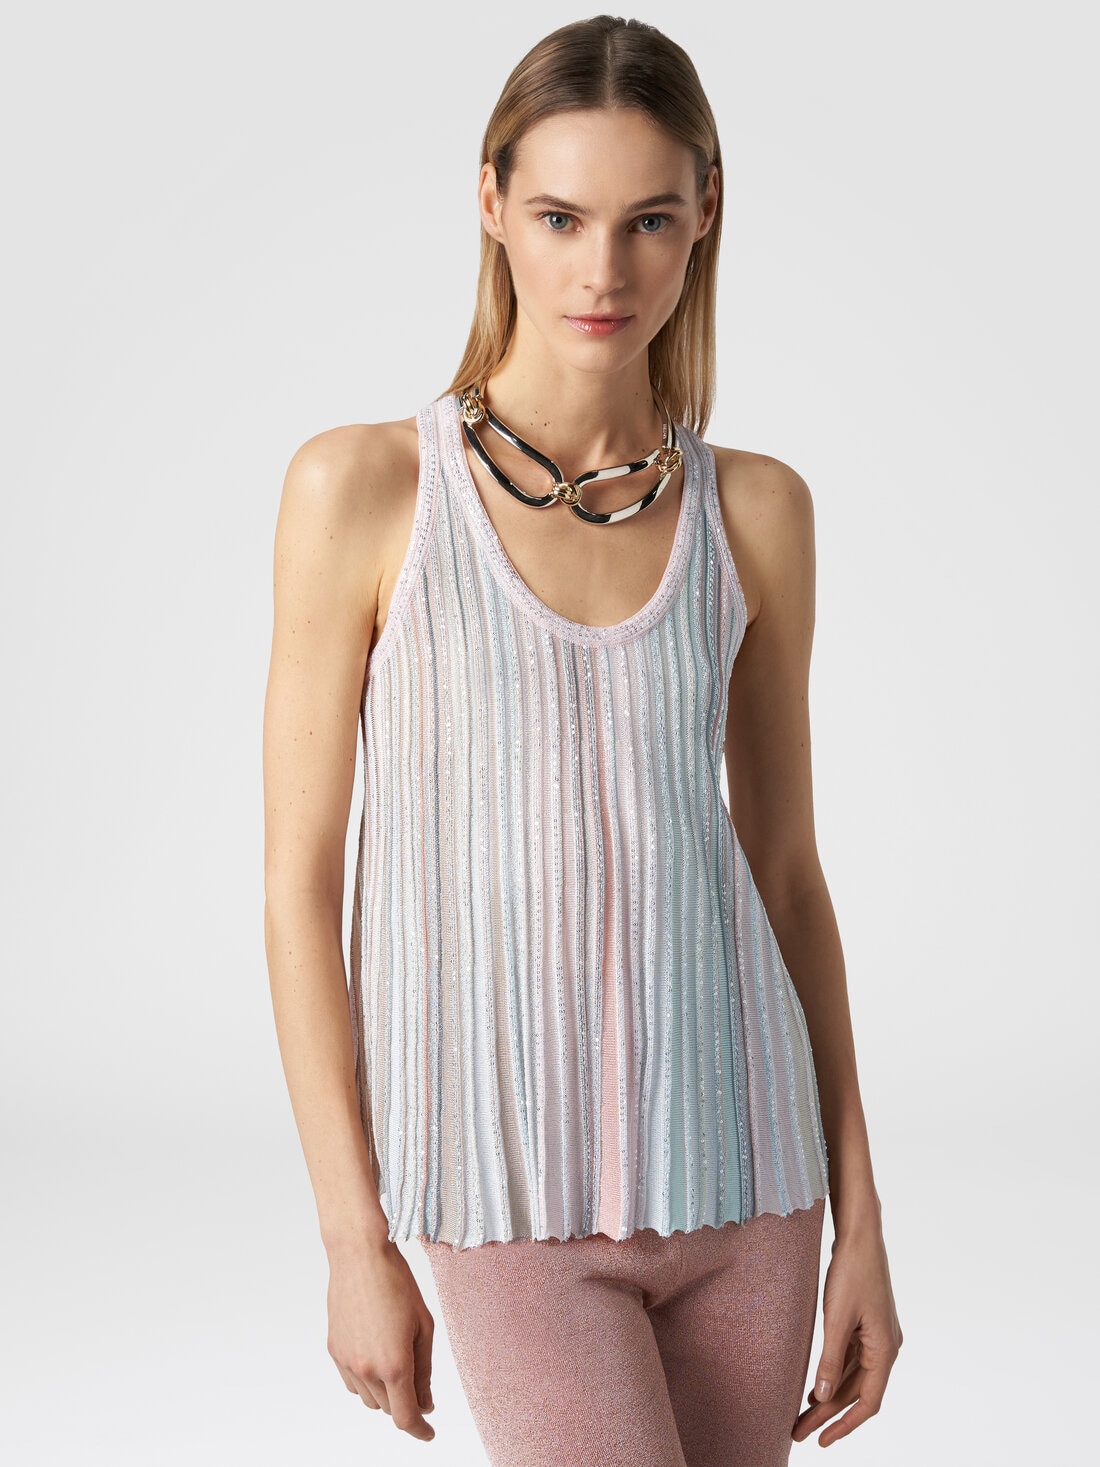 Tank top in vertical striped knit with sequins , Multicoloured  - DS24SK01BK033MSM9AH - 3